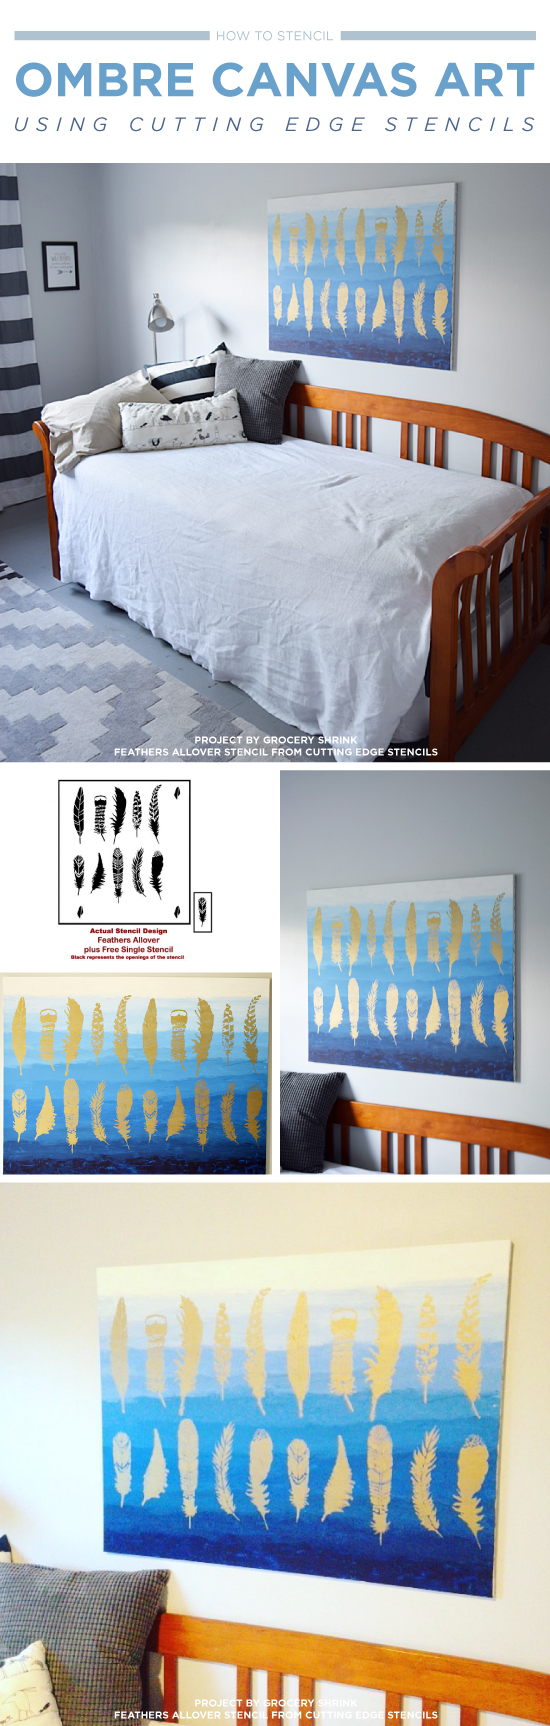 Cutting Edge Stencils shares how to create easy and inexpensive canvas art using the Feather Allover Stencil. http://www.cuttingedgestencils.com/feathers-stencil-feather-stencils-wall-pattern.html